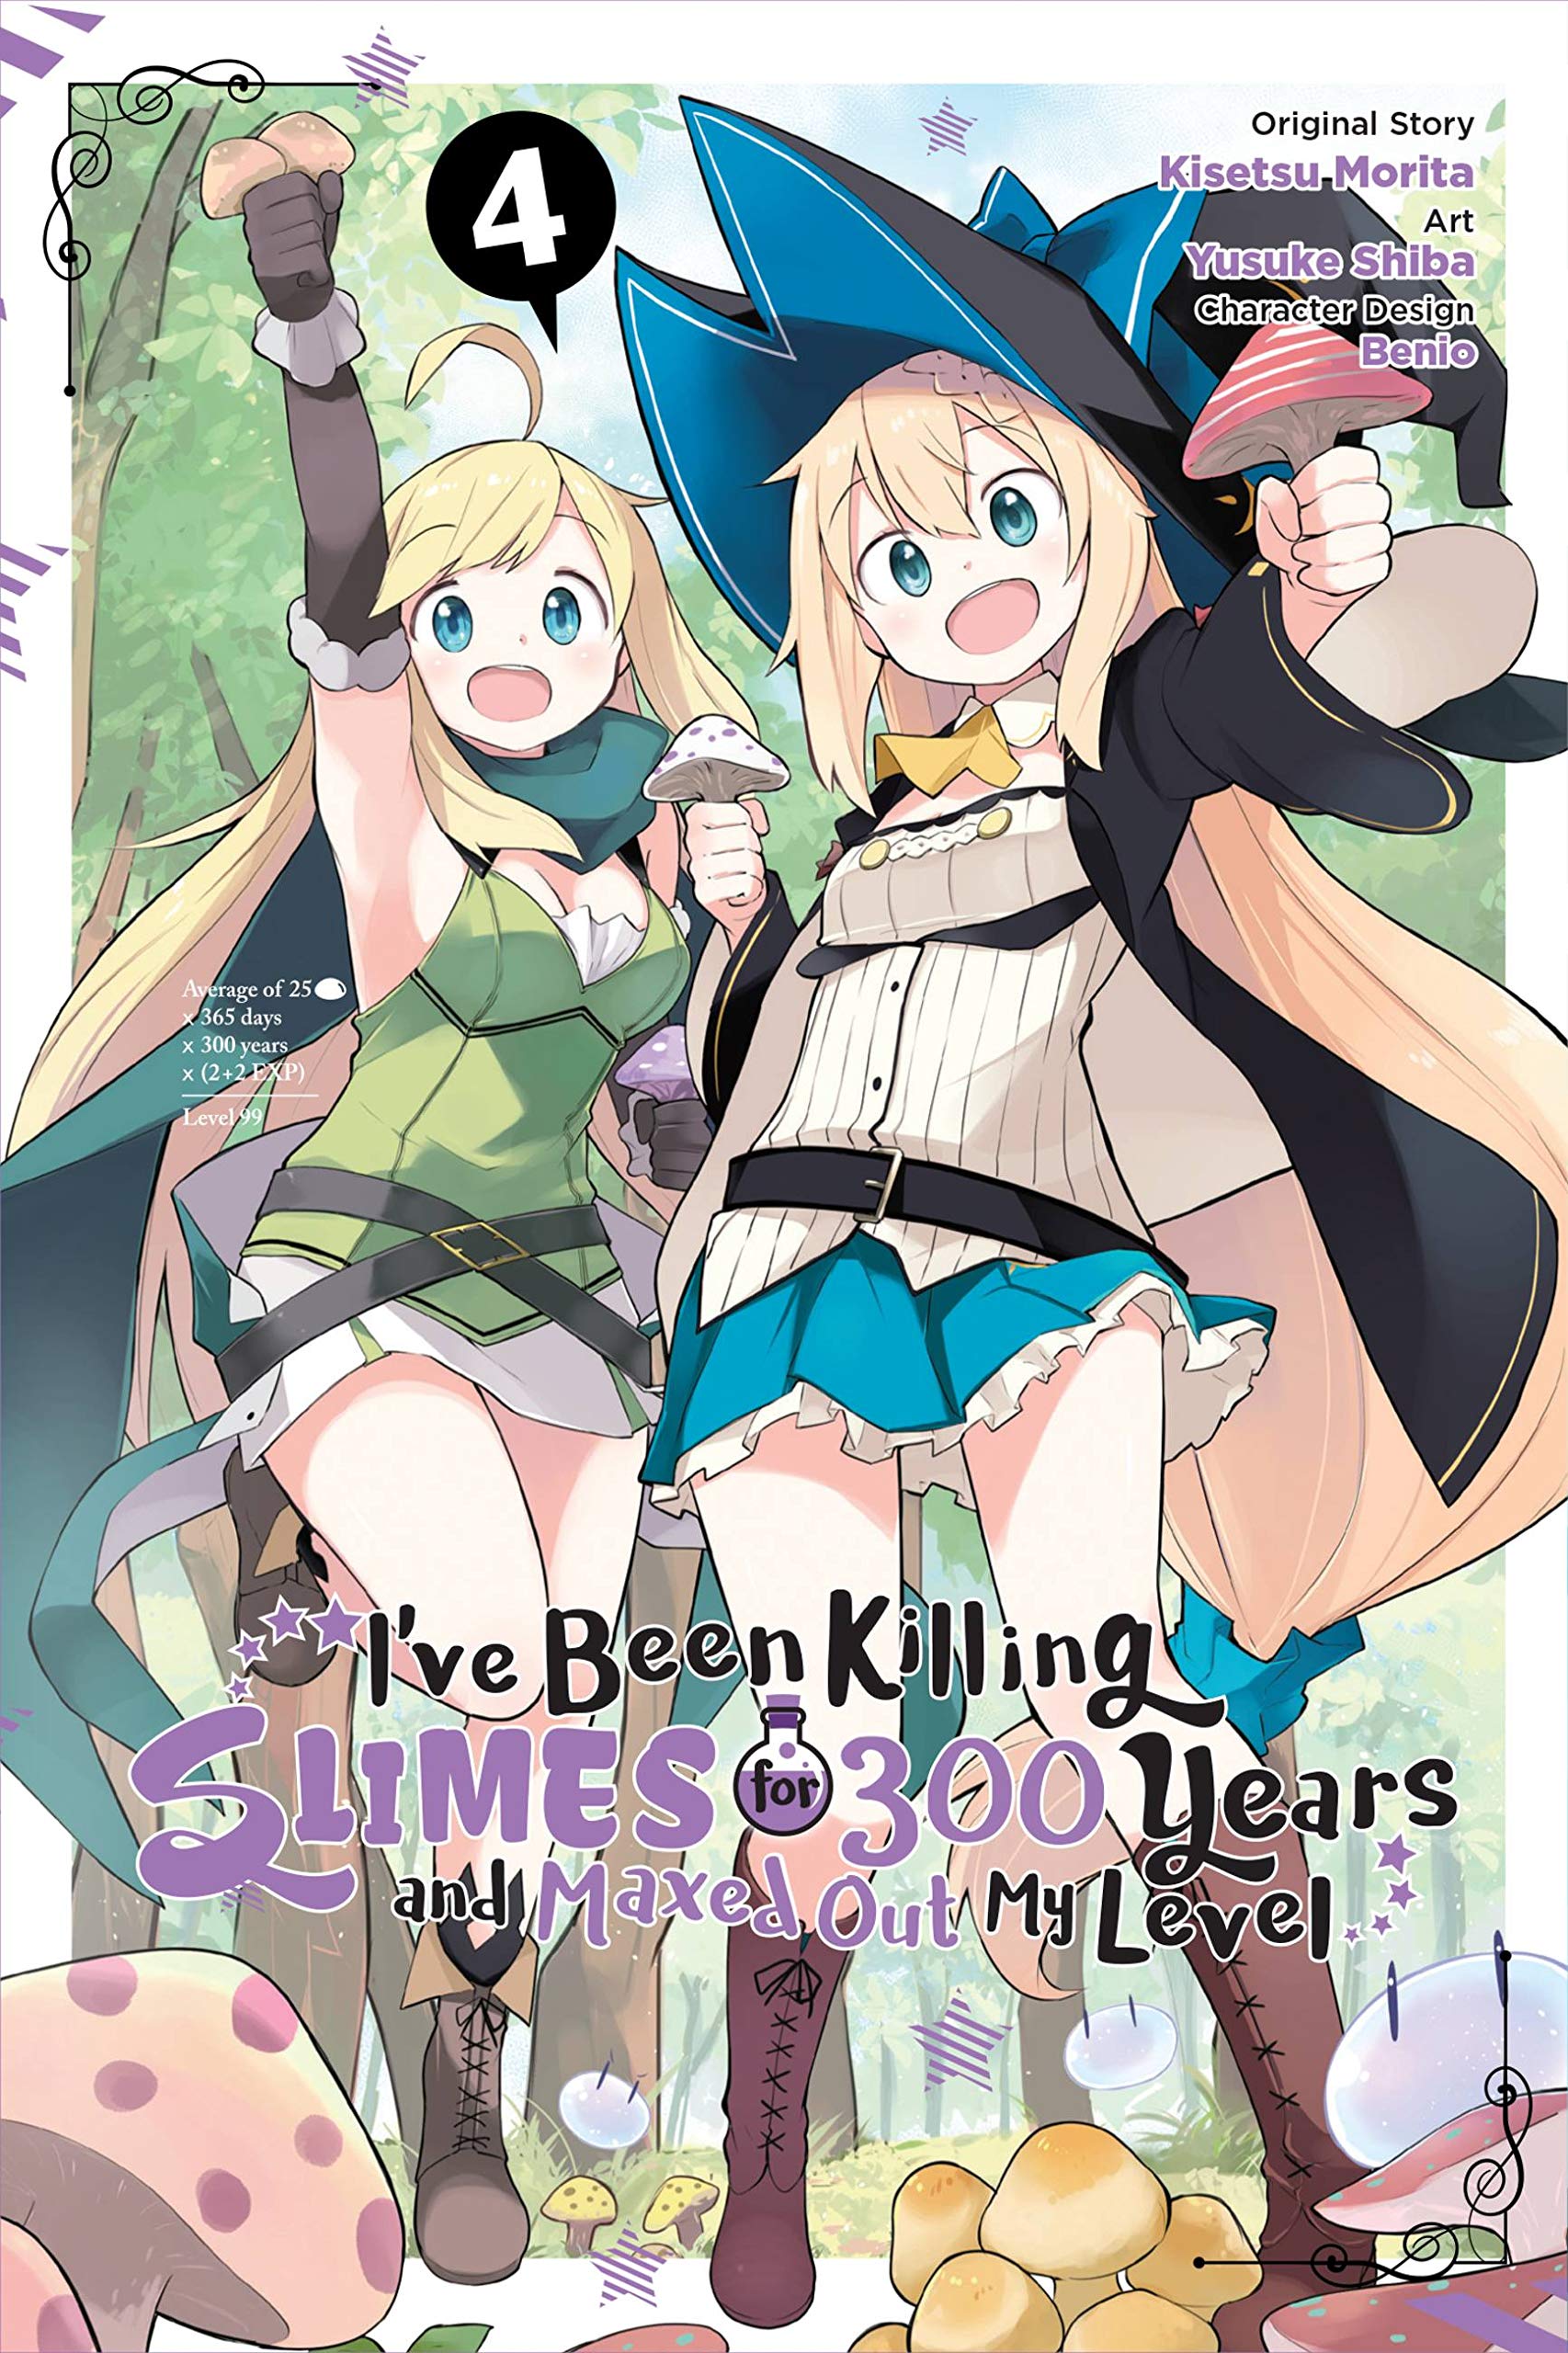 I\'ve Been Killing Slimes for 300 Years and Maxed Out My Level - Volume 4 | Yusuke Shiba